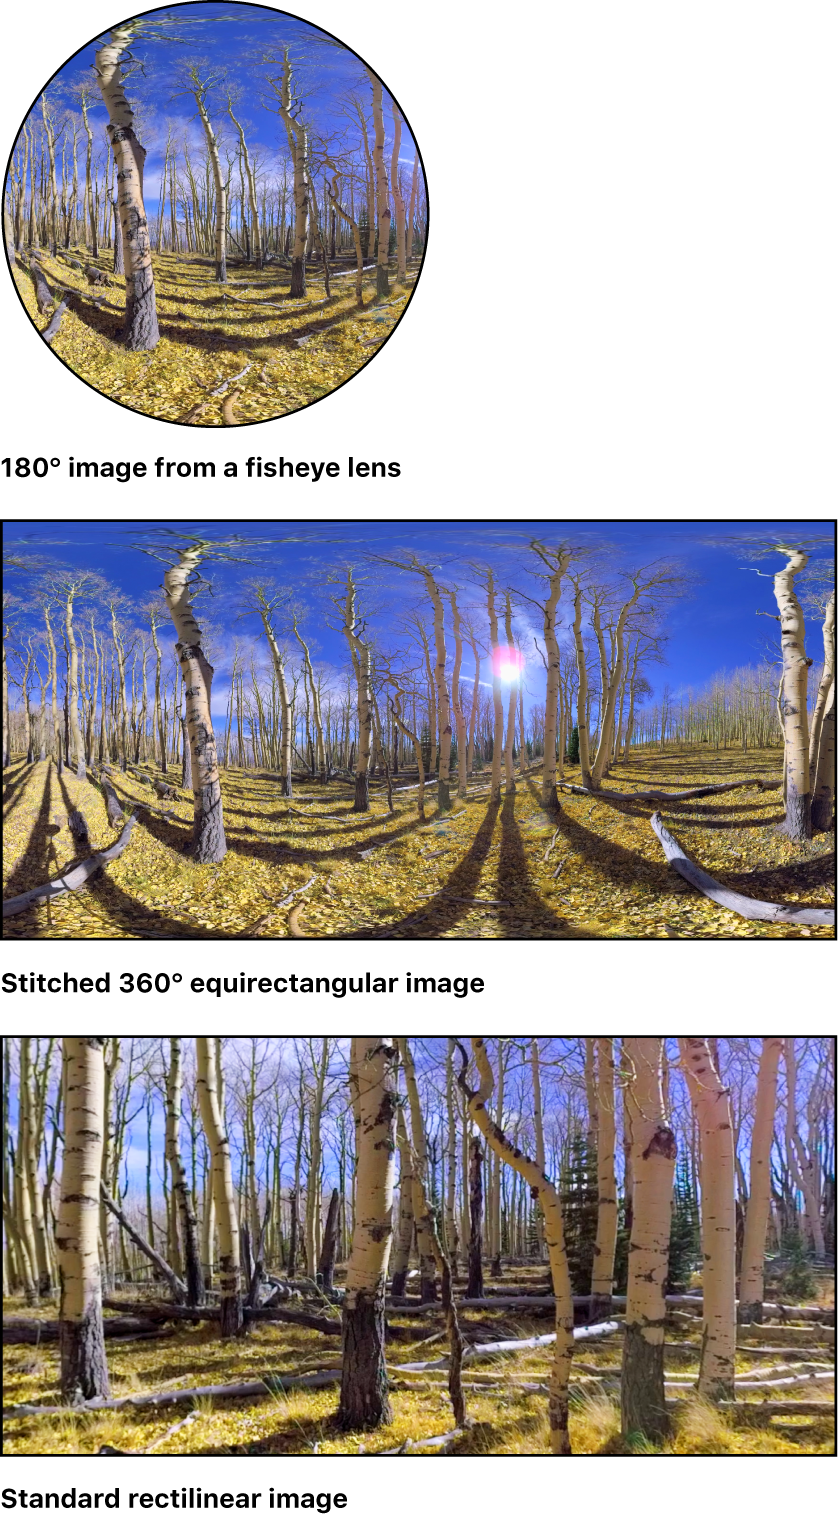 A single fisheye image, a stitched 360° image, and a standard rectilinear image